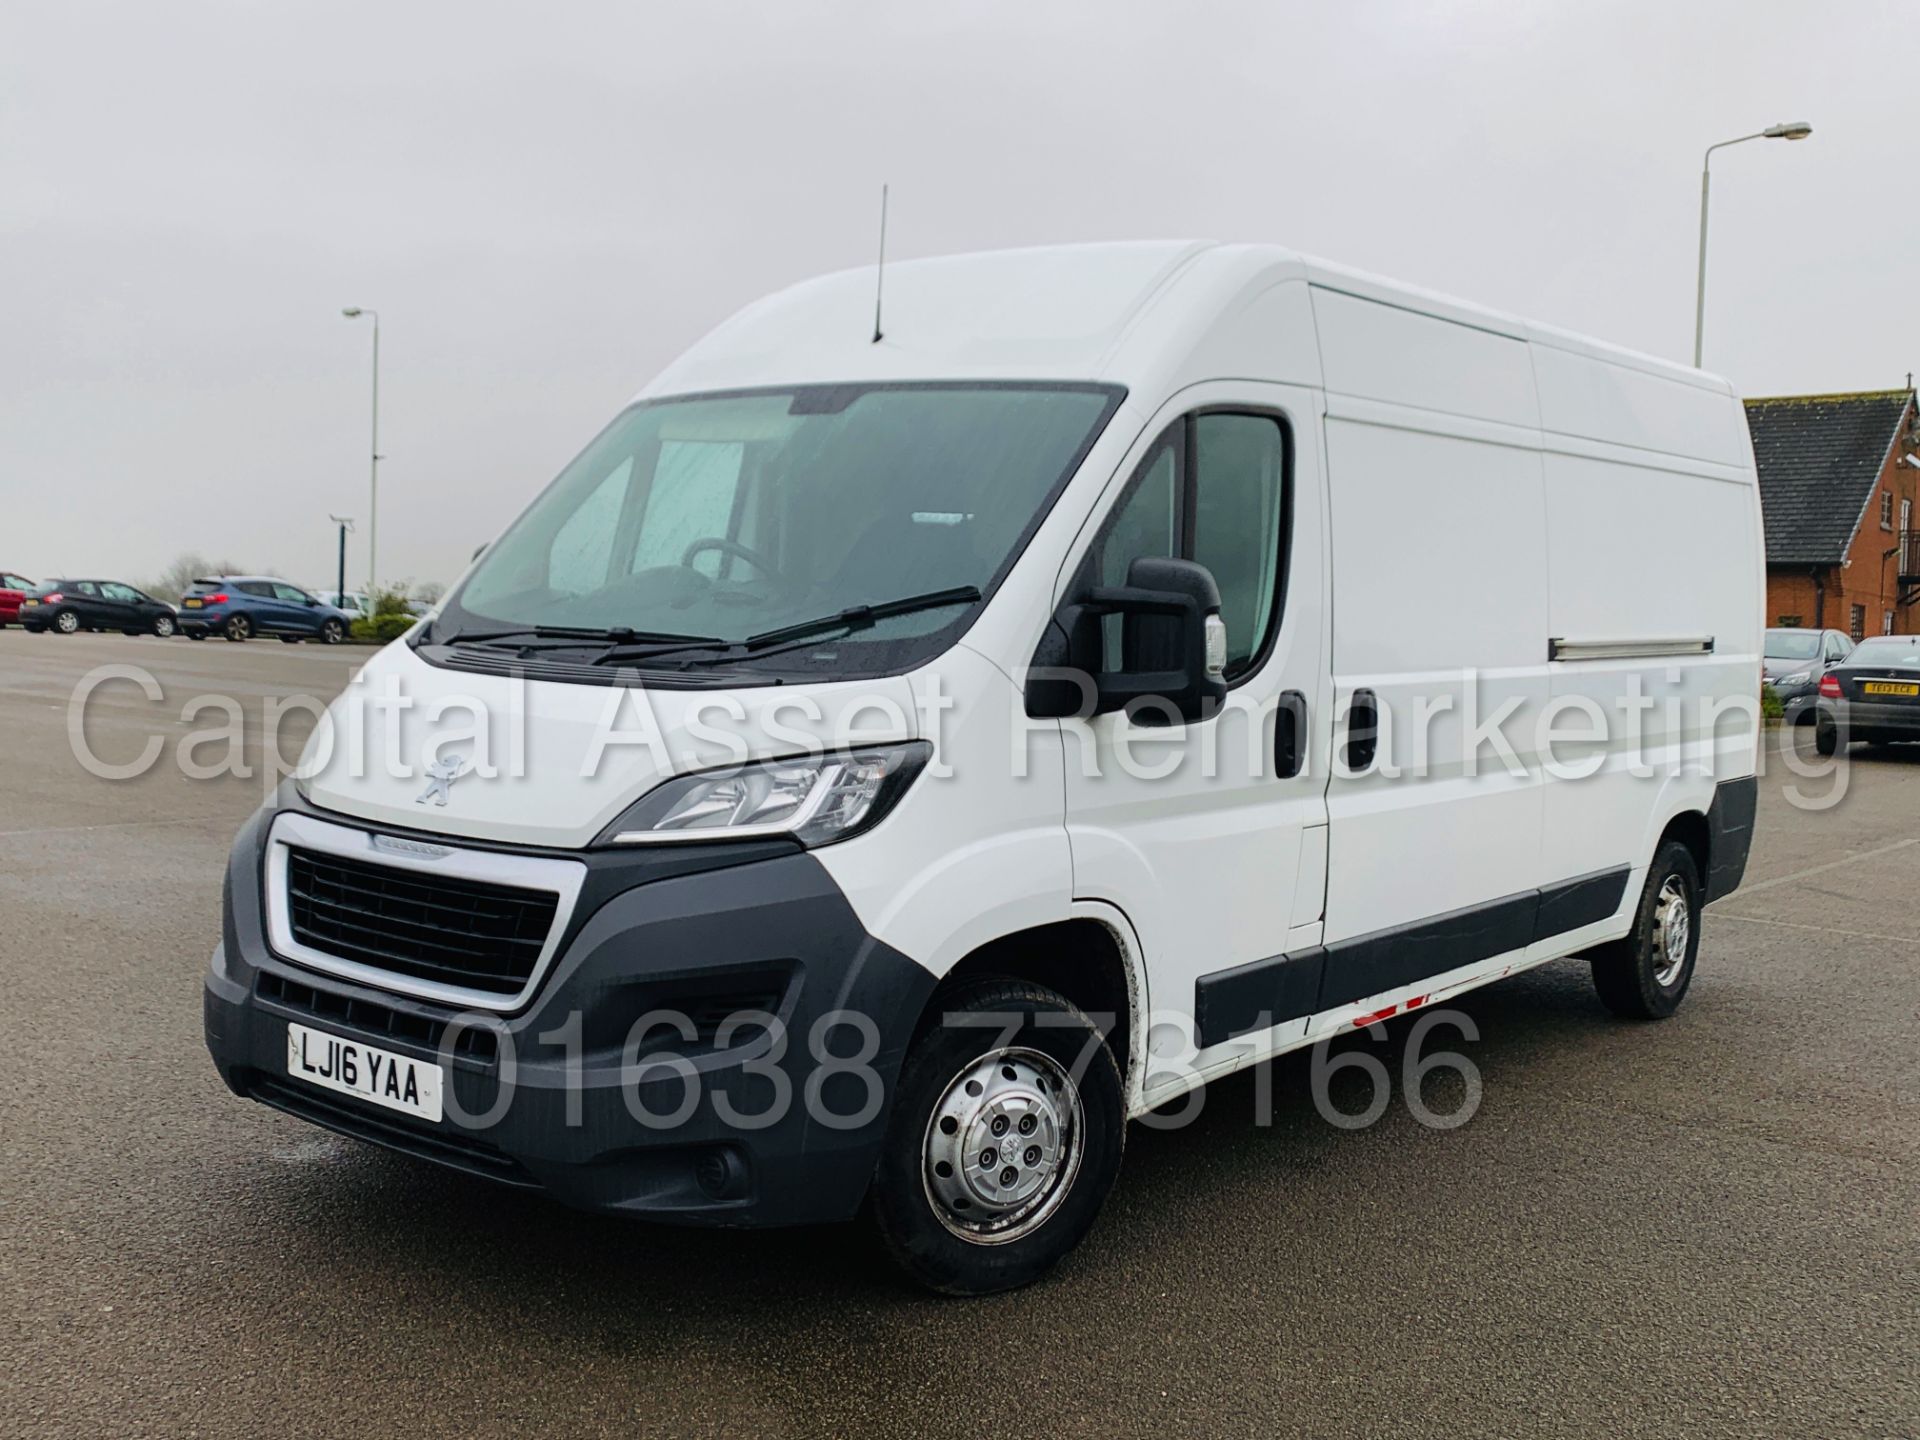 (On Sale) PEUGEOT BOXER *PROFESSIONAL* LWB HI-ROOF (2016) '2.2 HDI - 6 SPEED' *SAT NAV & AIR CON* - Image 4 of 33